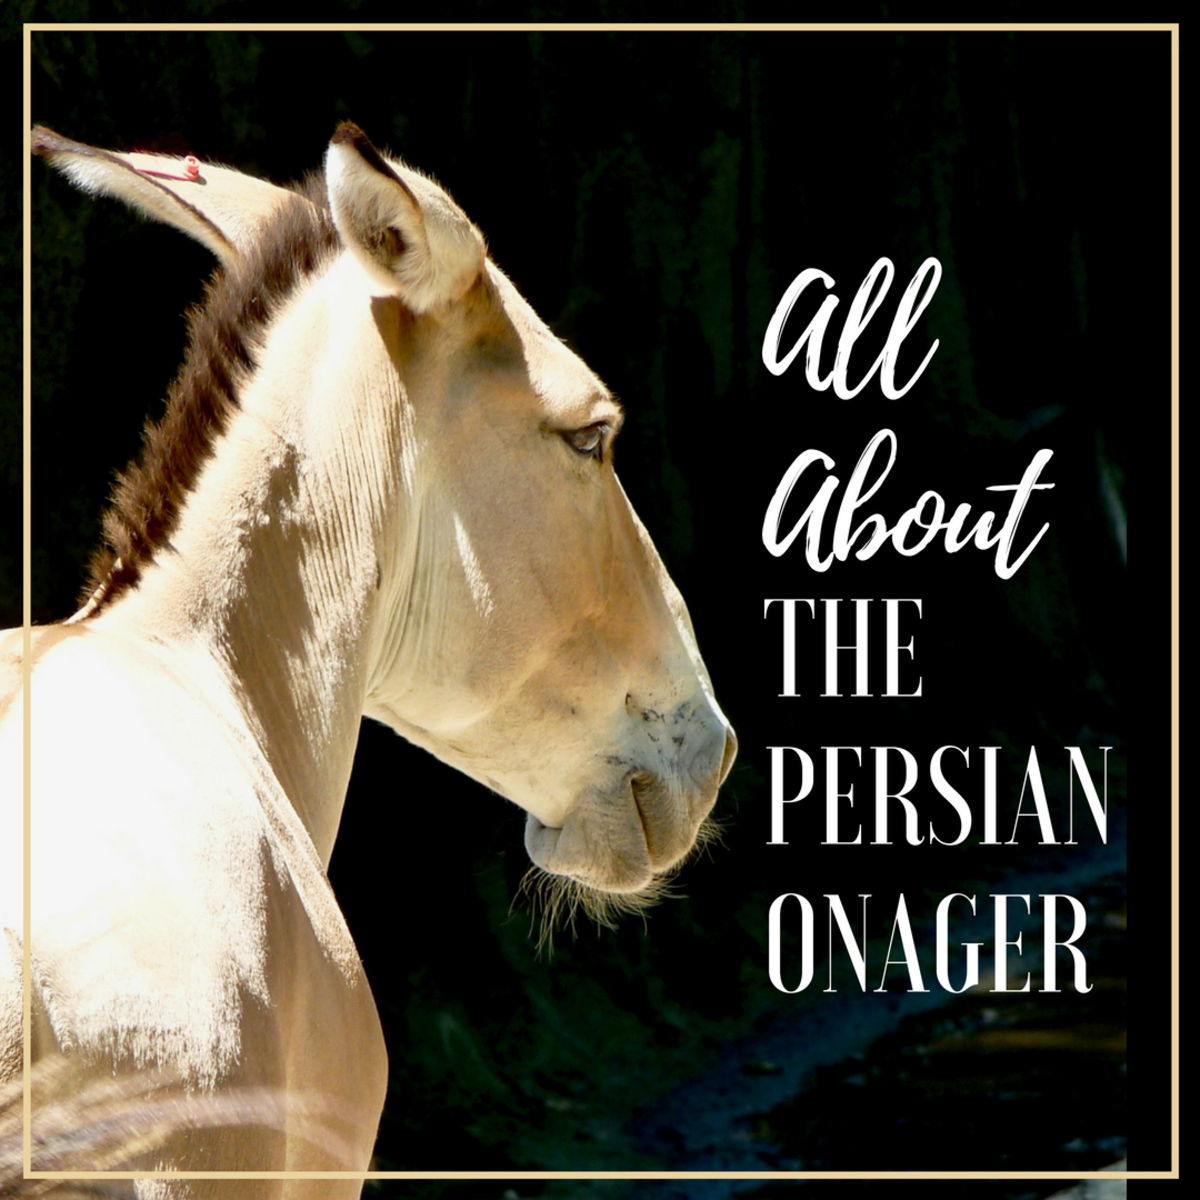 Learn all about the Persian Onager.